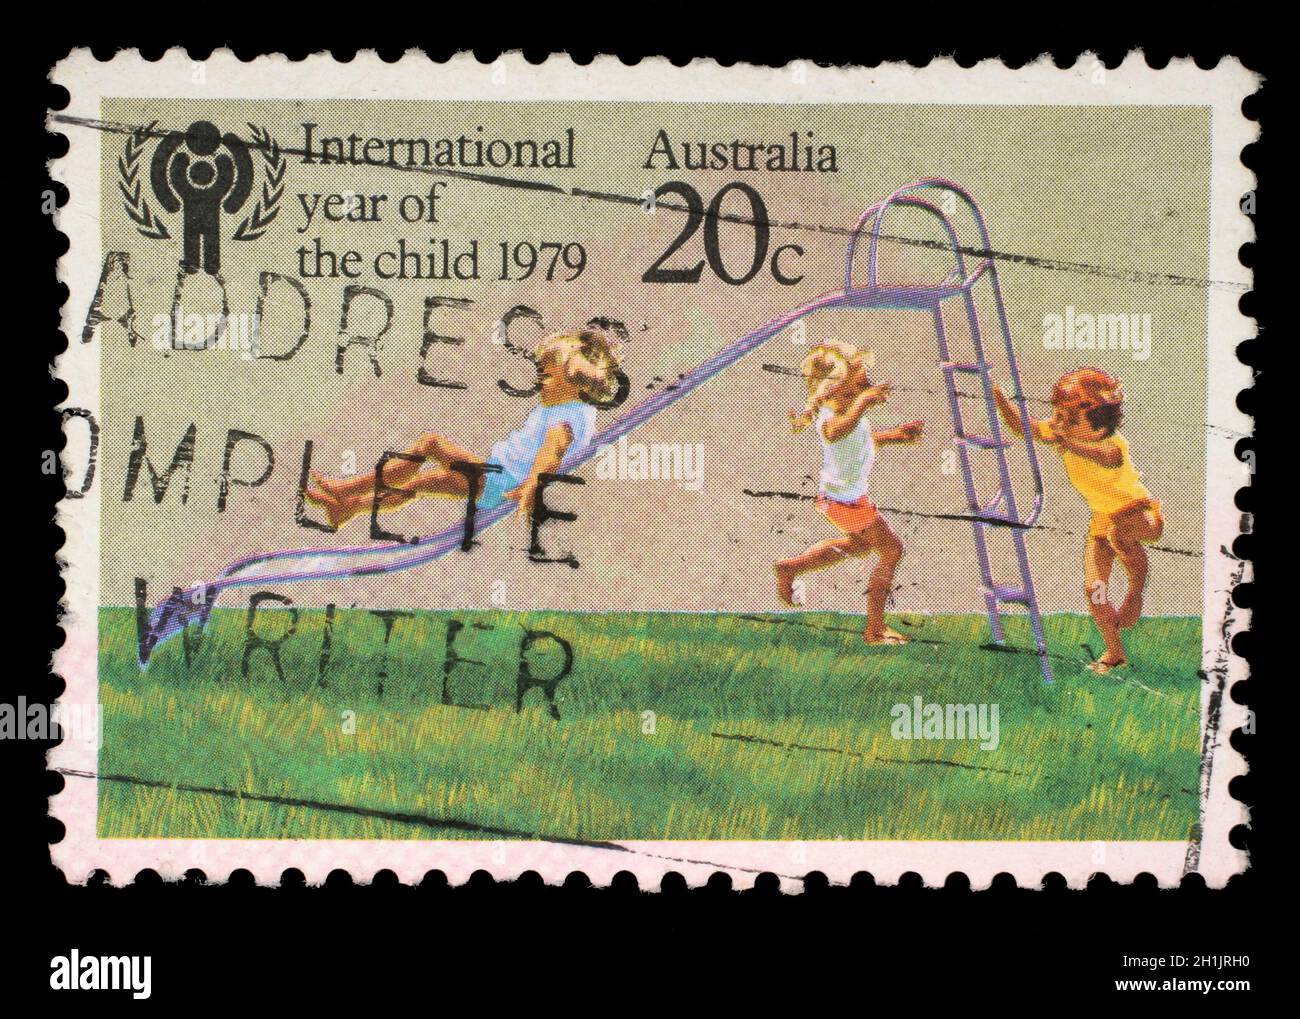 AUSTRALIA - CIRCA 1979: A stamp printed in Australia from the 'International Year of the Child' issue shows Children playing on Slide, circa 1979. Stock Photo